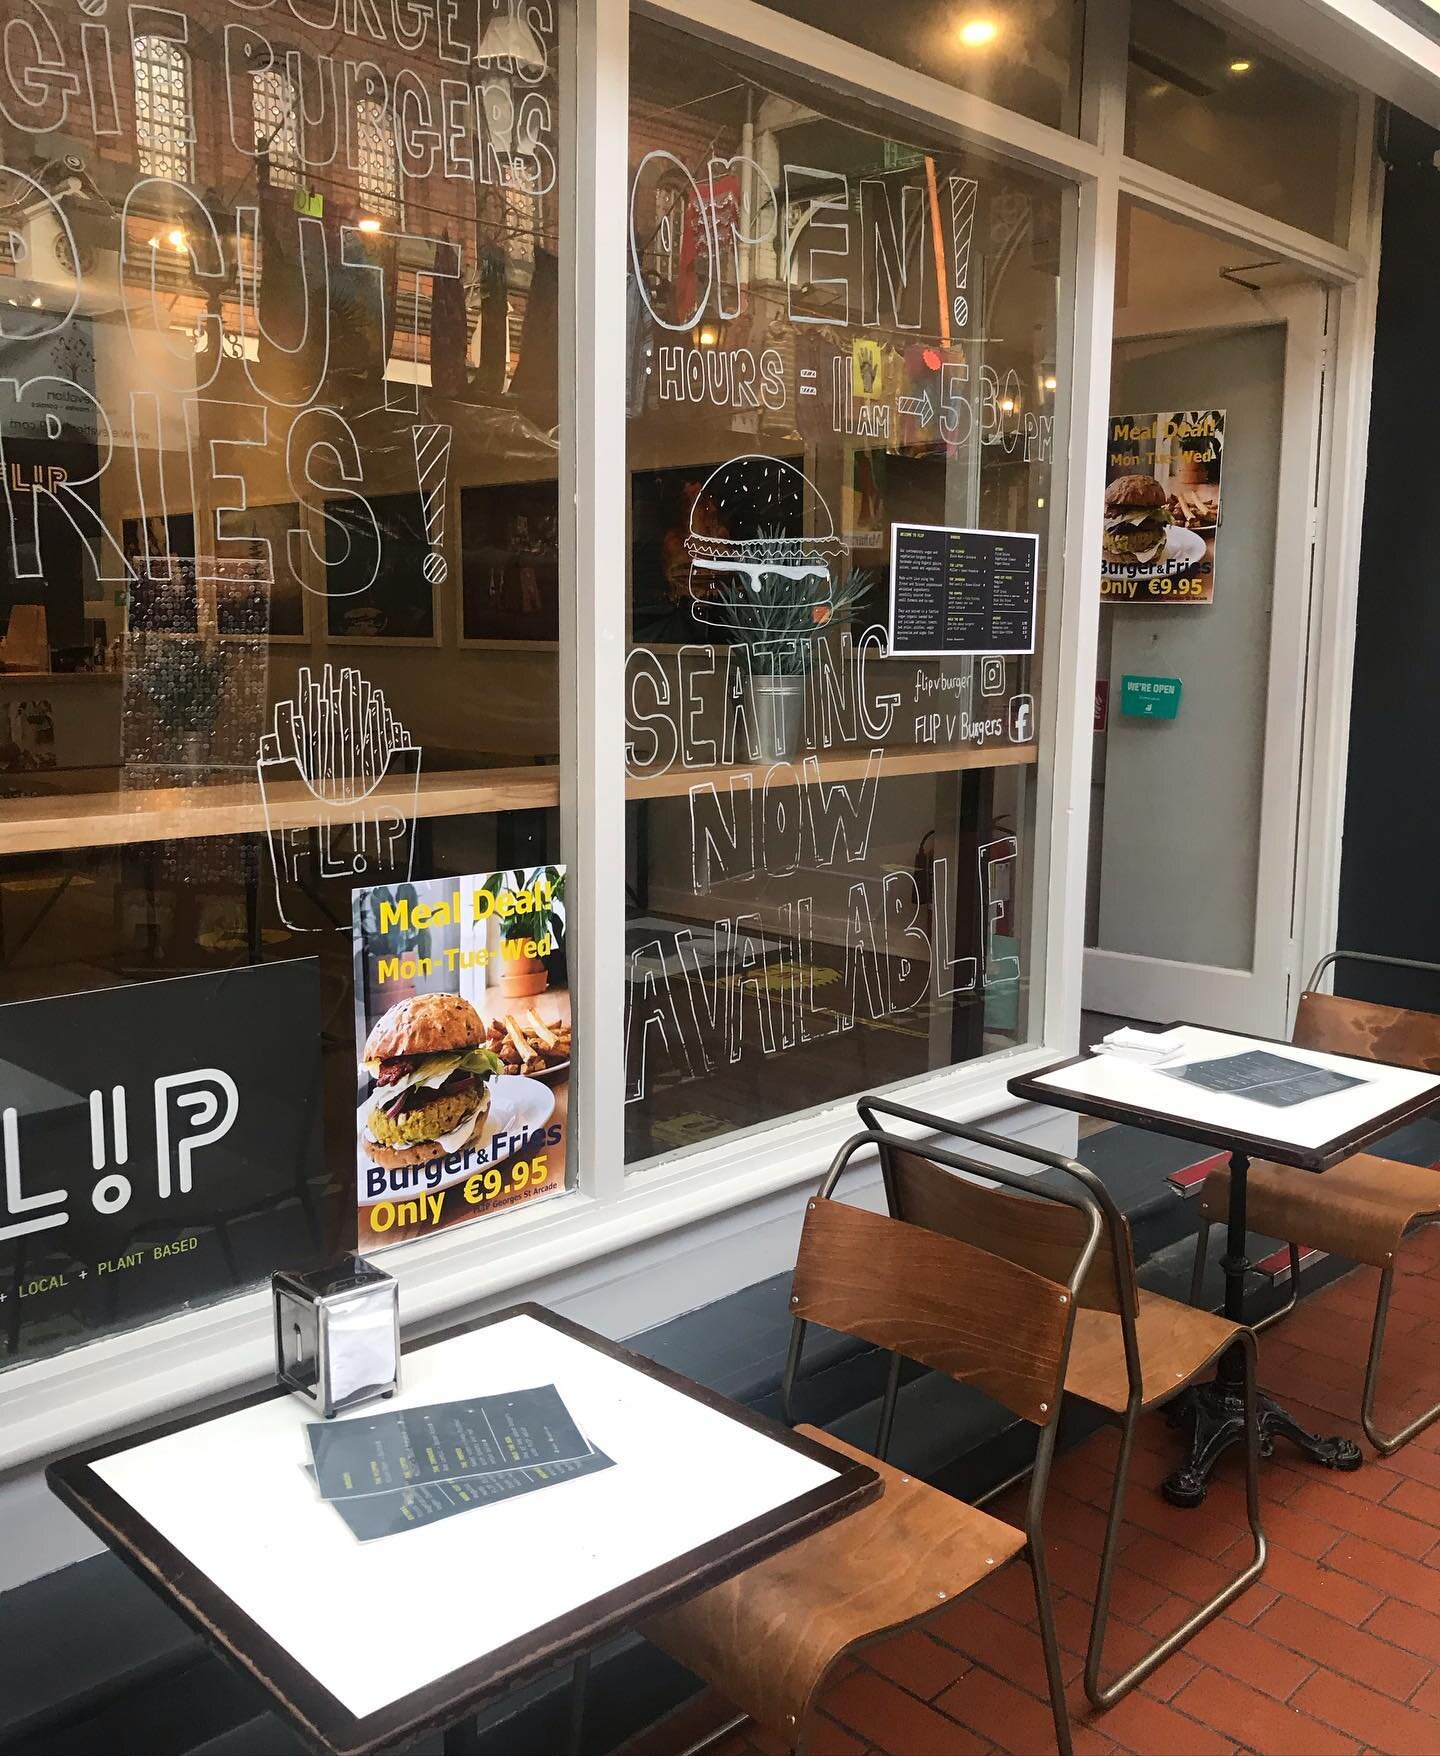 We are OPEN from 11am -5.30pm 
Seating outside and takeaway !! 
#flipburger #bestburgersintown #veggieburgers #plantbased